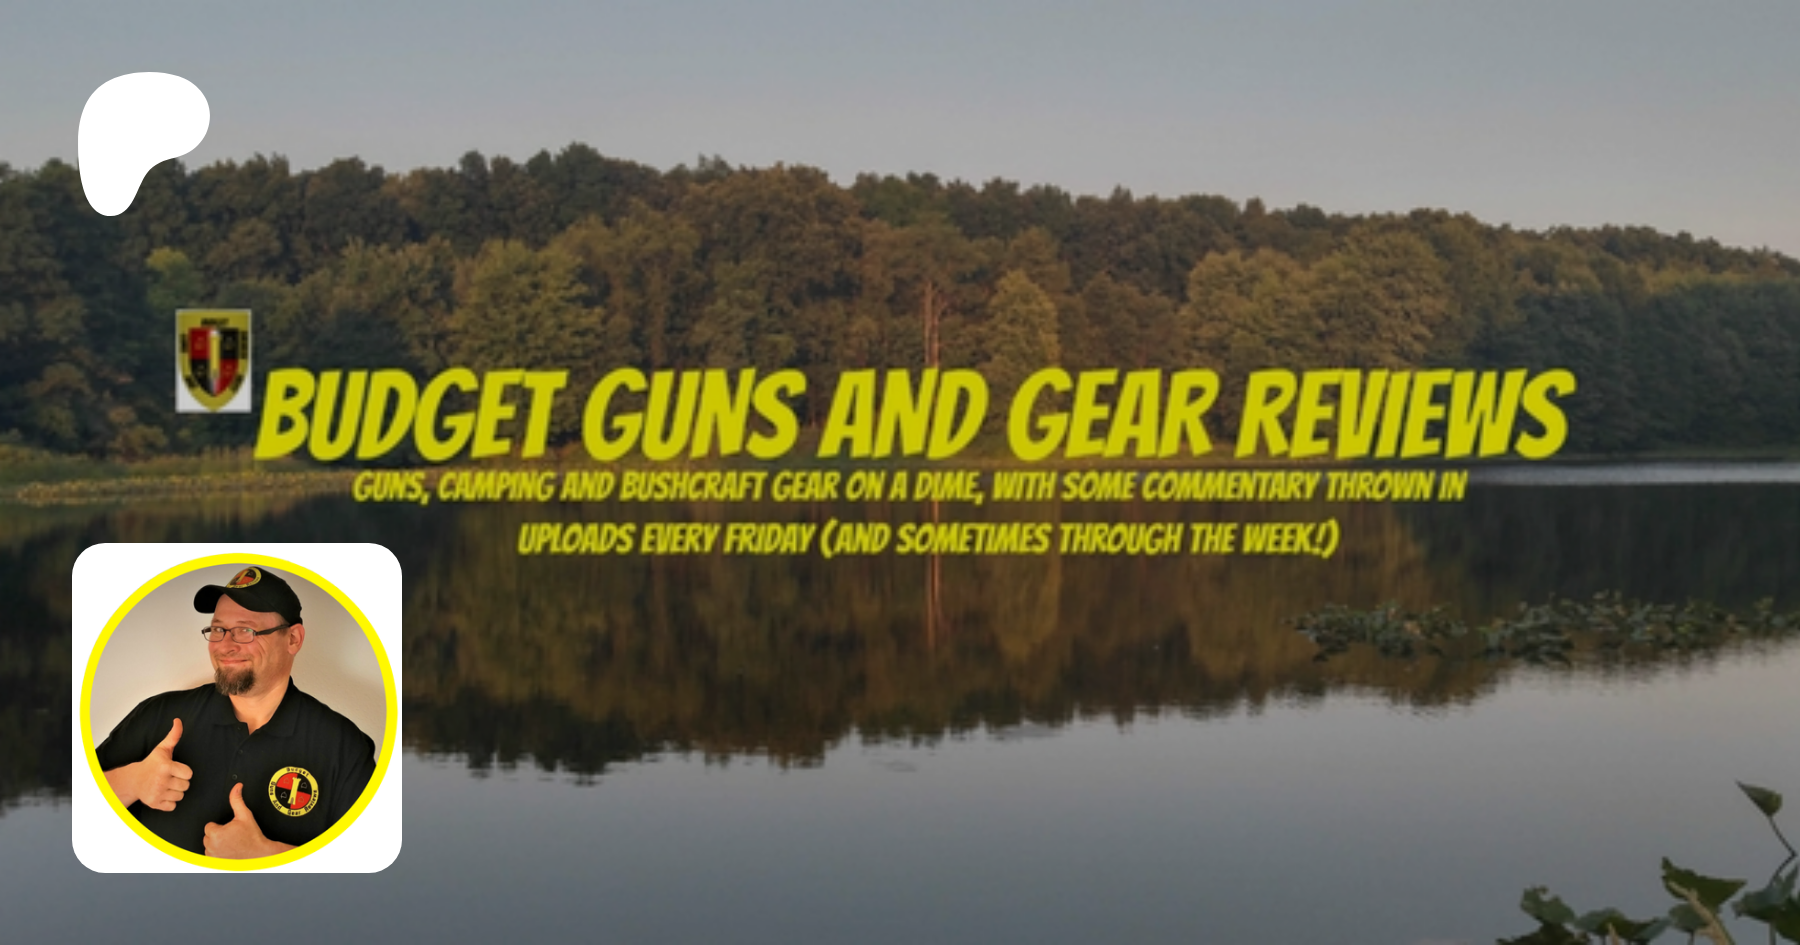 Budget Guns and Gear Reviews, creating Video reviews of budget friendly  firearms and outdoors